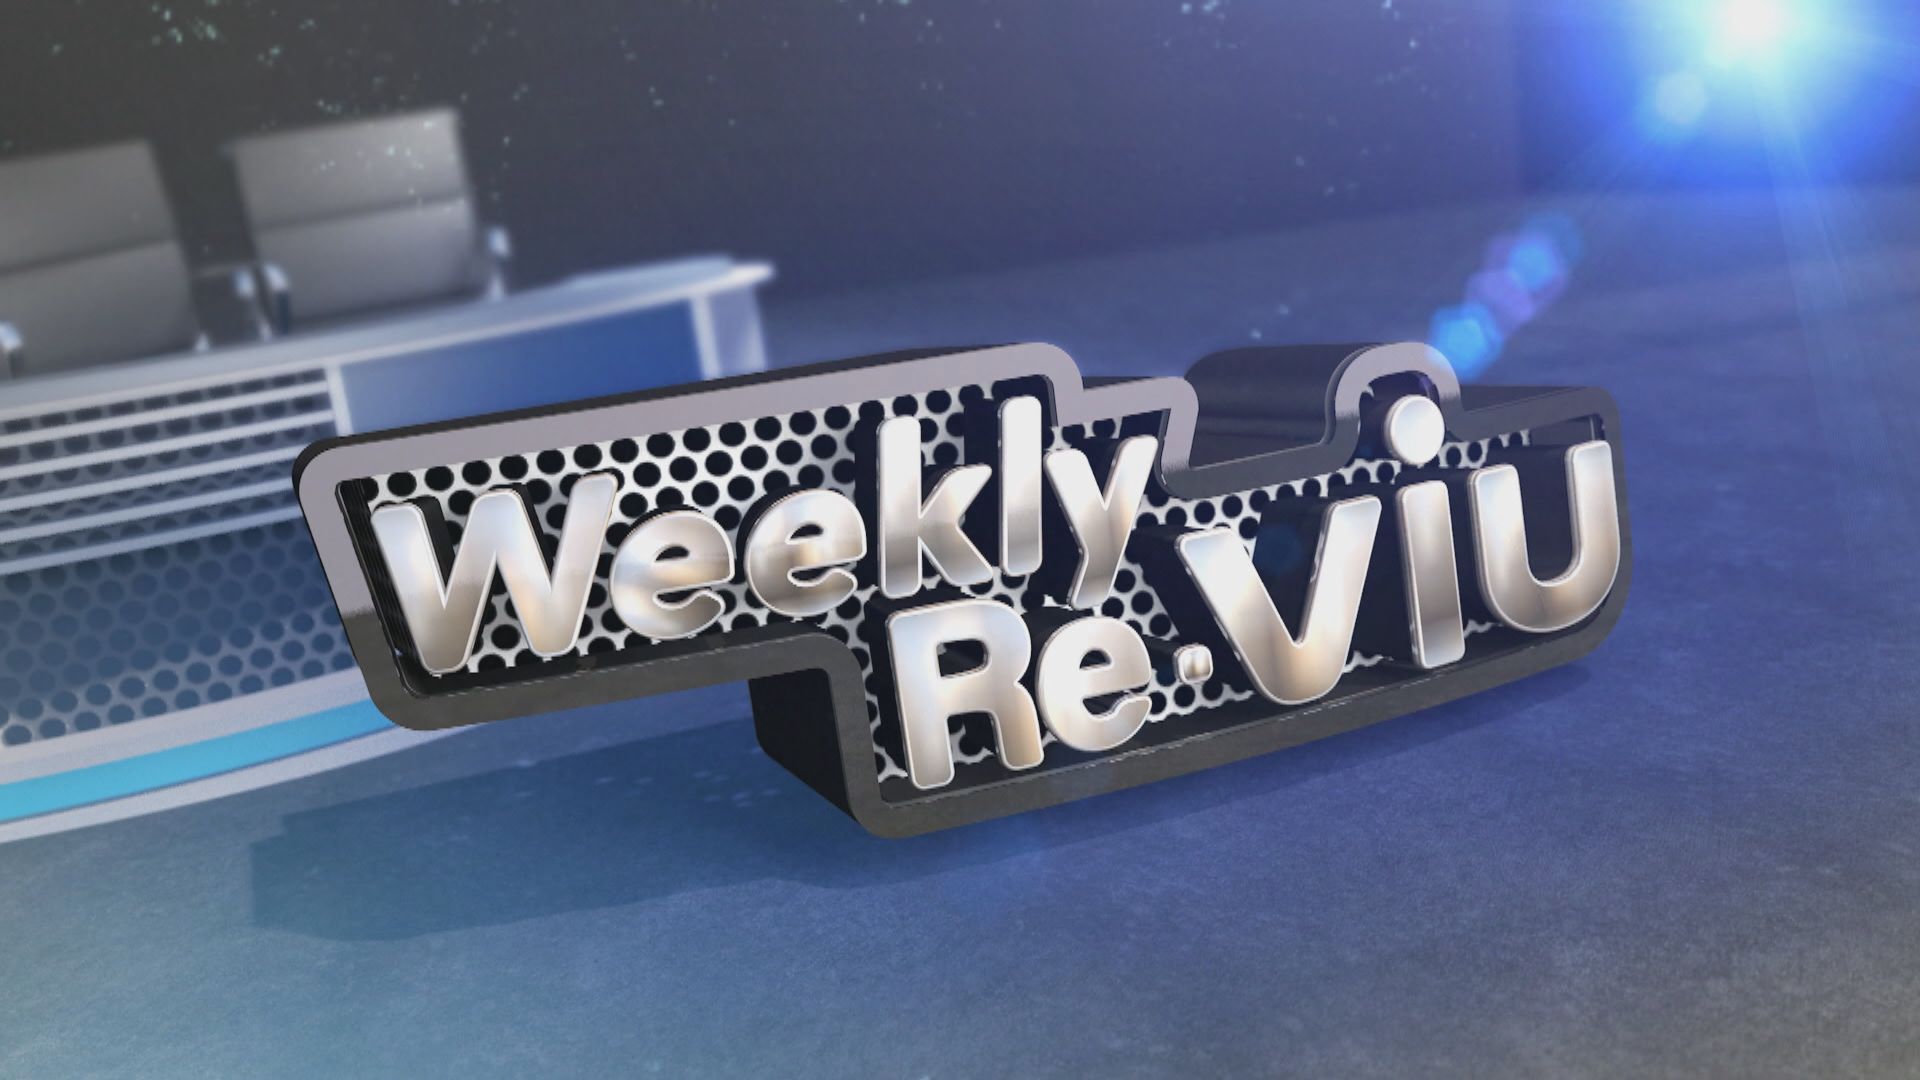 Weekly ReViu | Part Two - Story Roundup (10.12.2022)